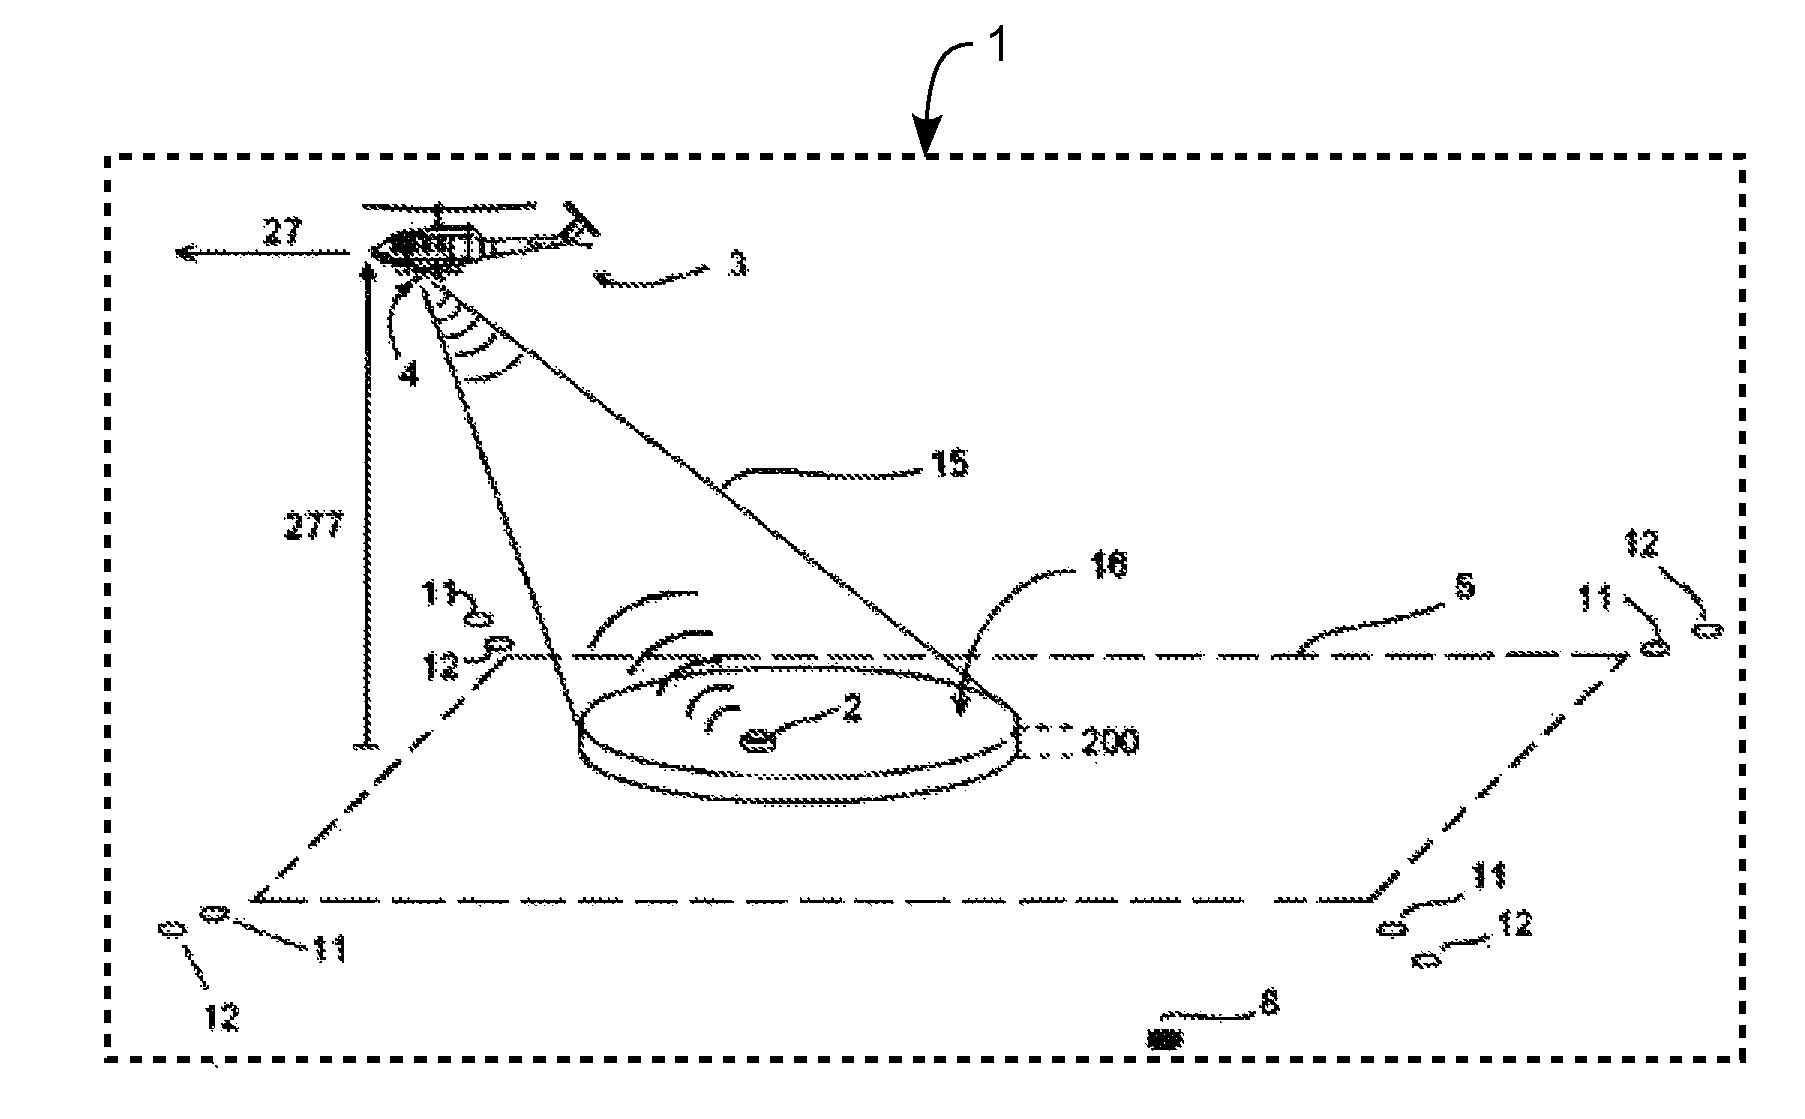 System and method for detecting, locating and identifying objects located above the ground and below the ground in a pre-referenced area of interest